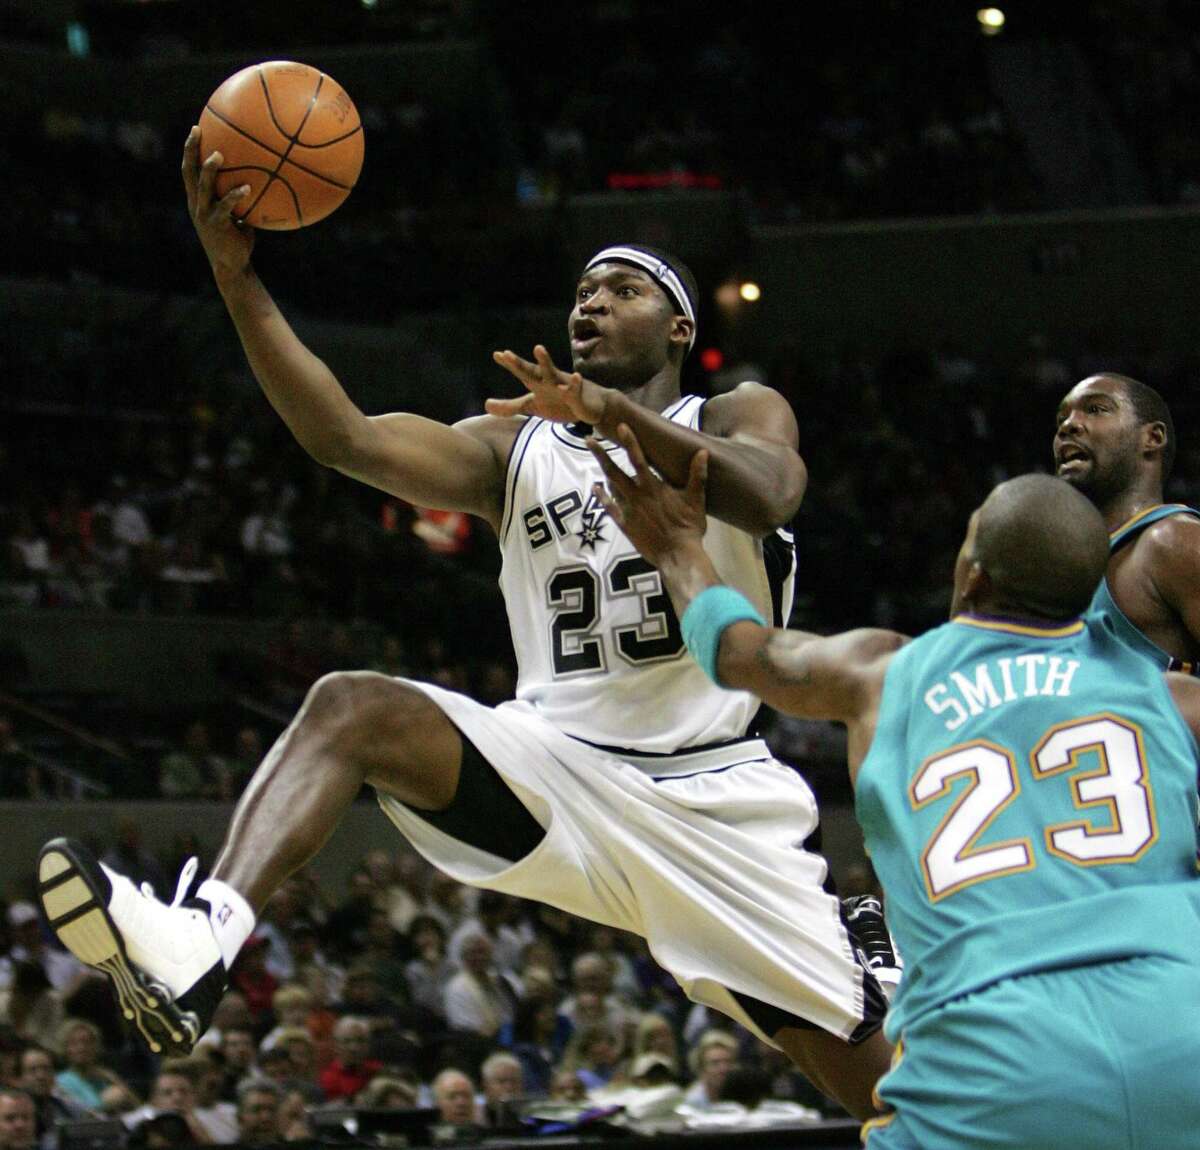 Former San Antonio Spurs guard Devin Brown (23) played in what is now the Spurs Youth Basketball League (SYBL), which serves about 10,000 South Texas kids annually and is geared toward low-income families and communities,